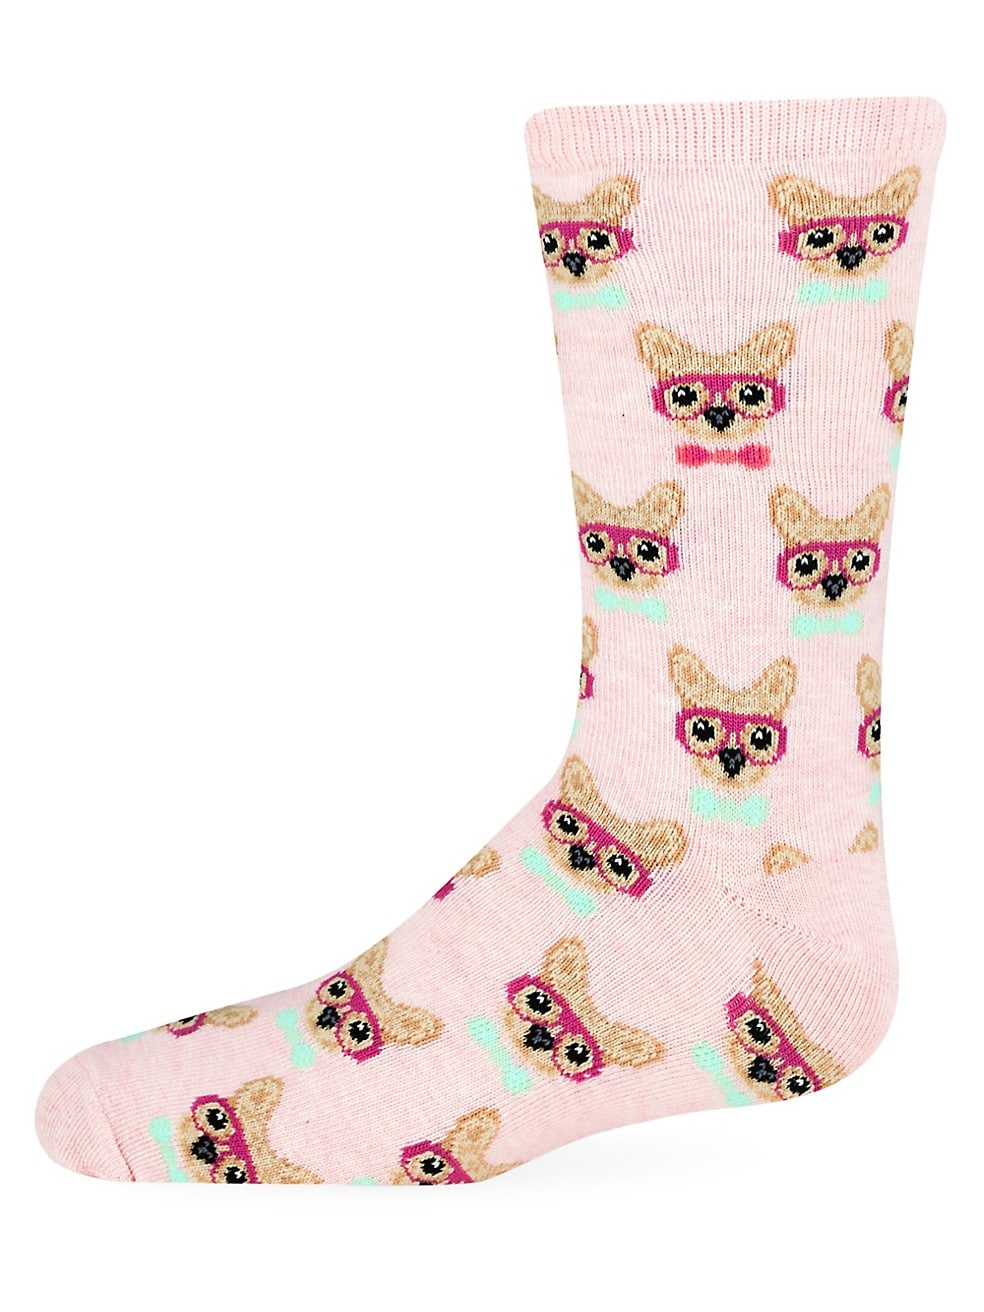 Kid's "Smart Frenchie" Crew Socks by Hot Sox